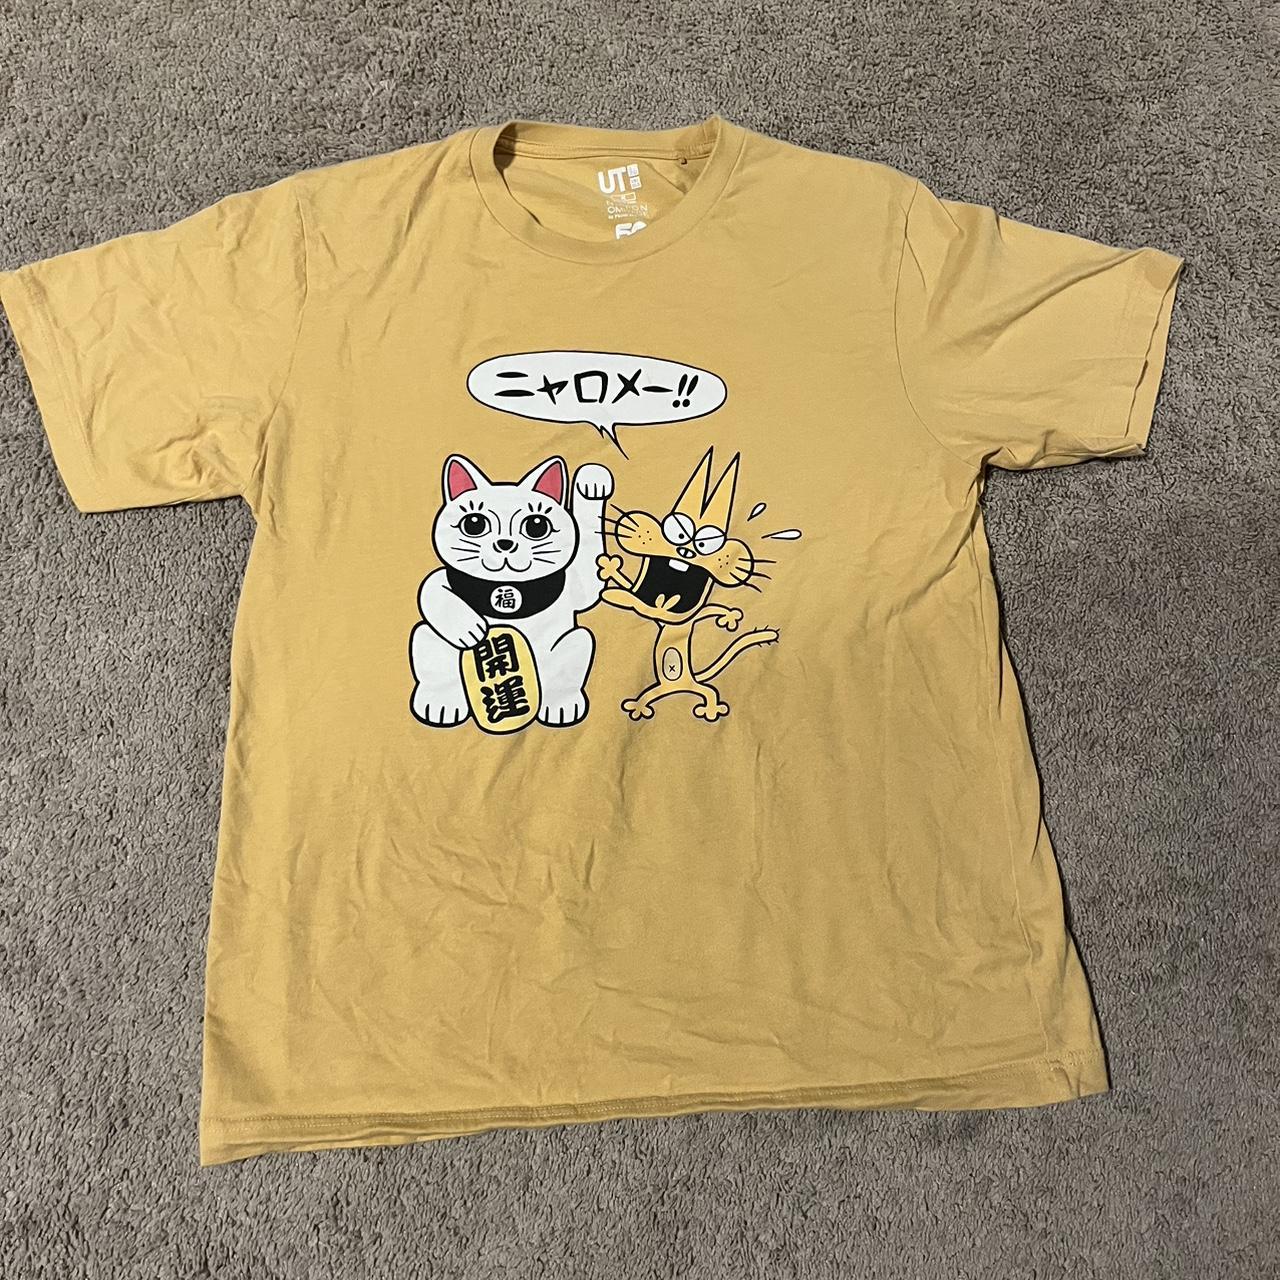 UNIQLO Men's Gold and Yellow T-shirt | Depop